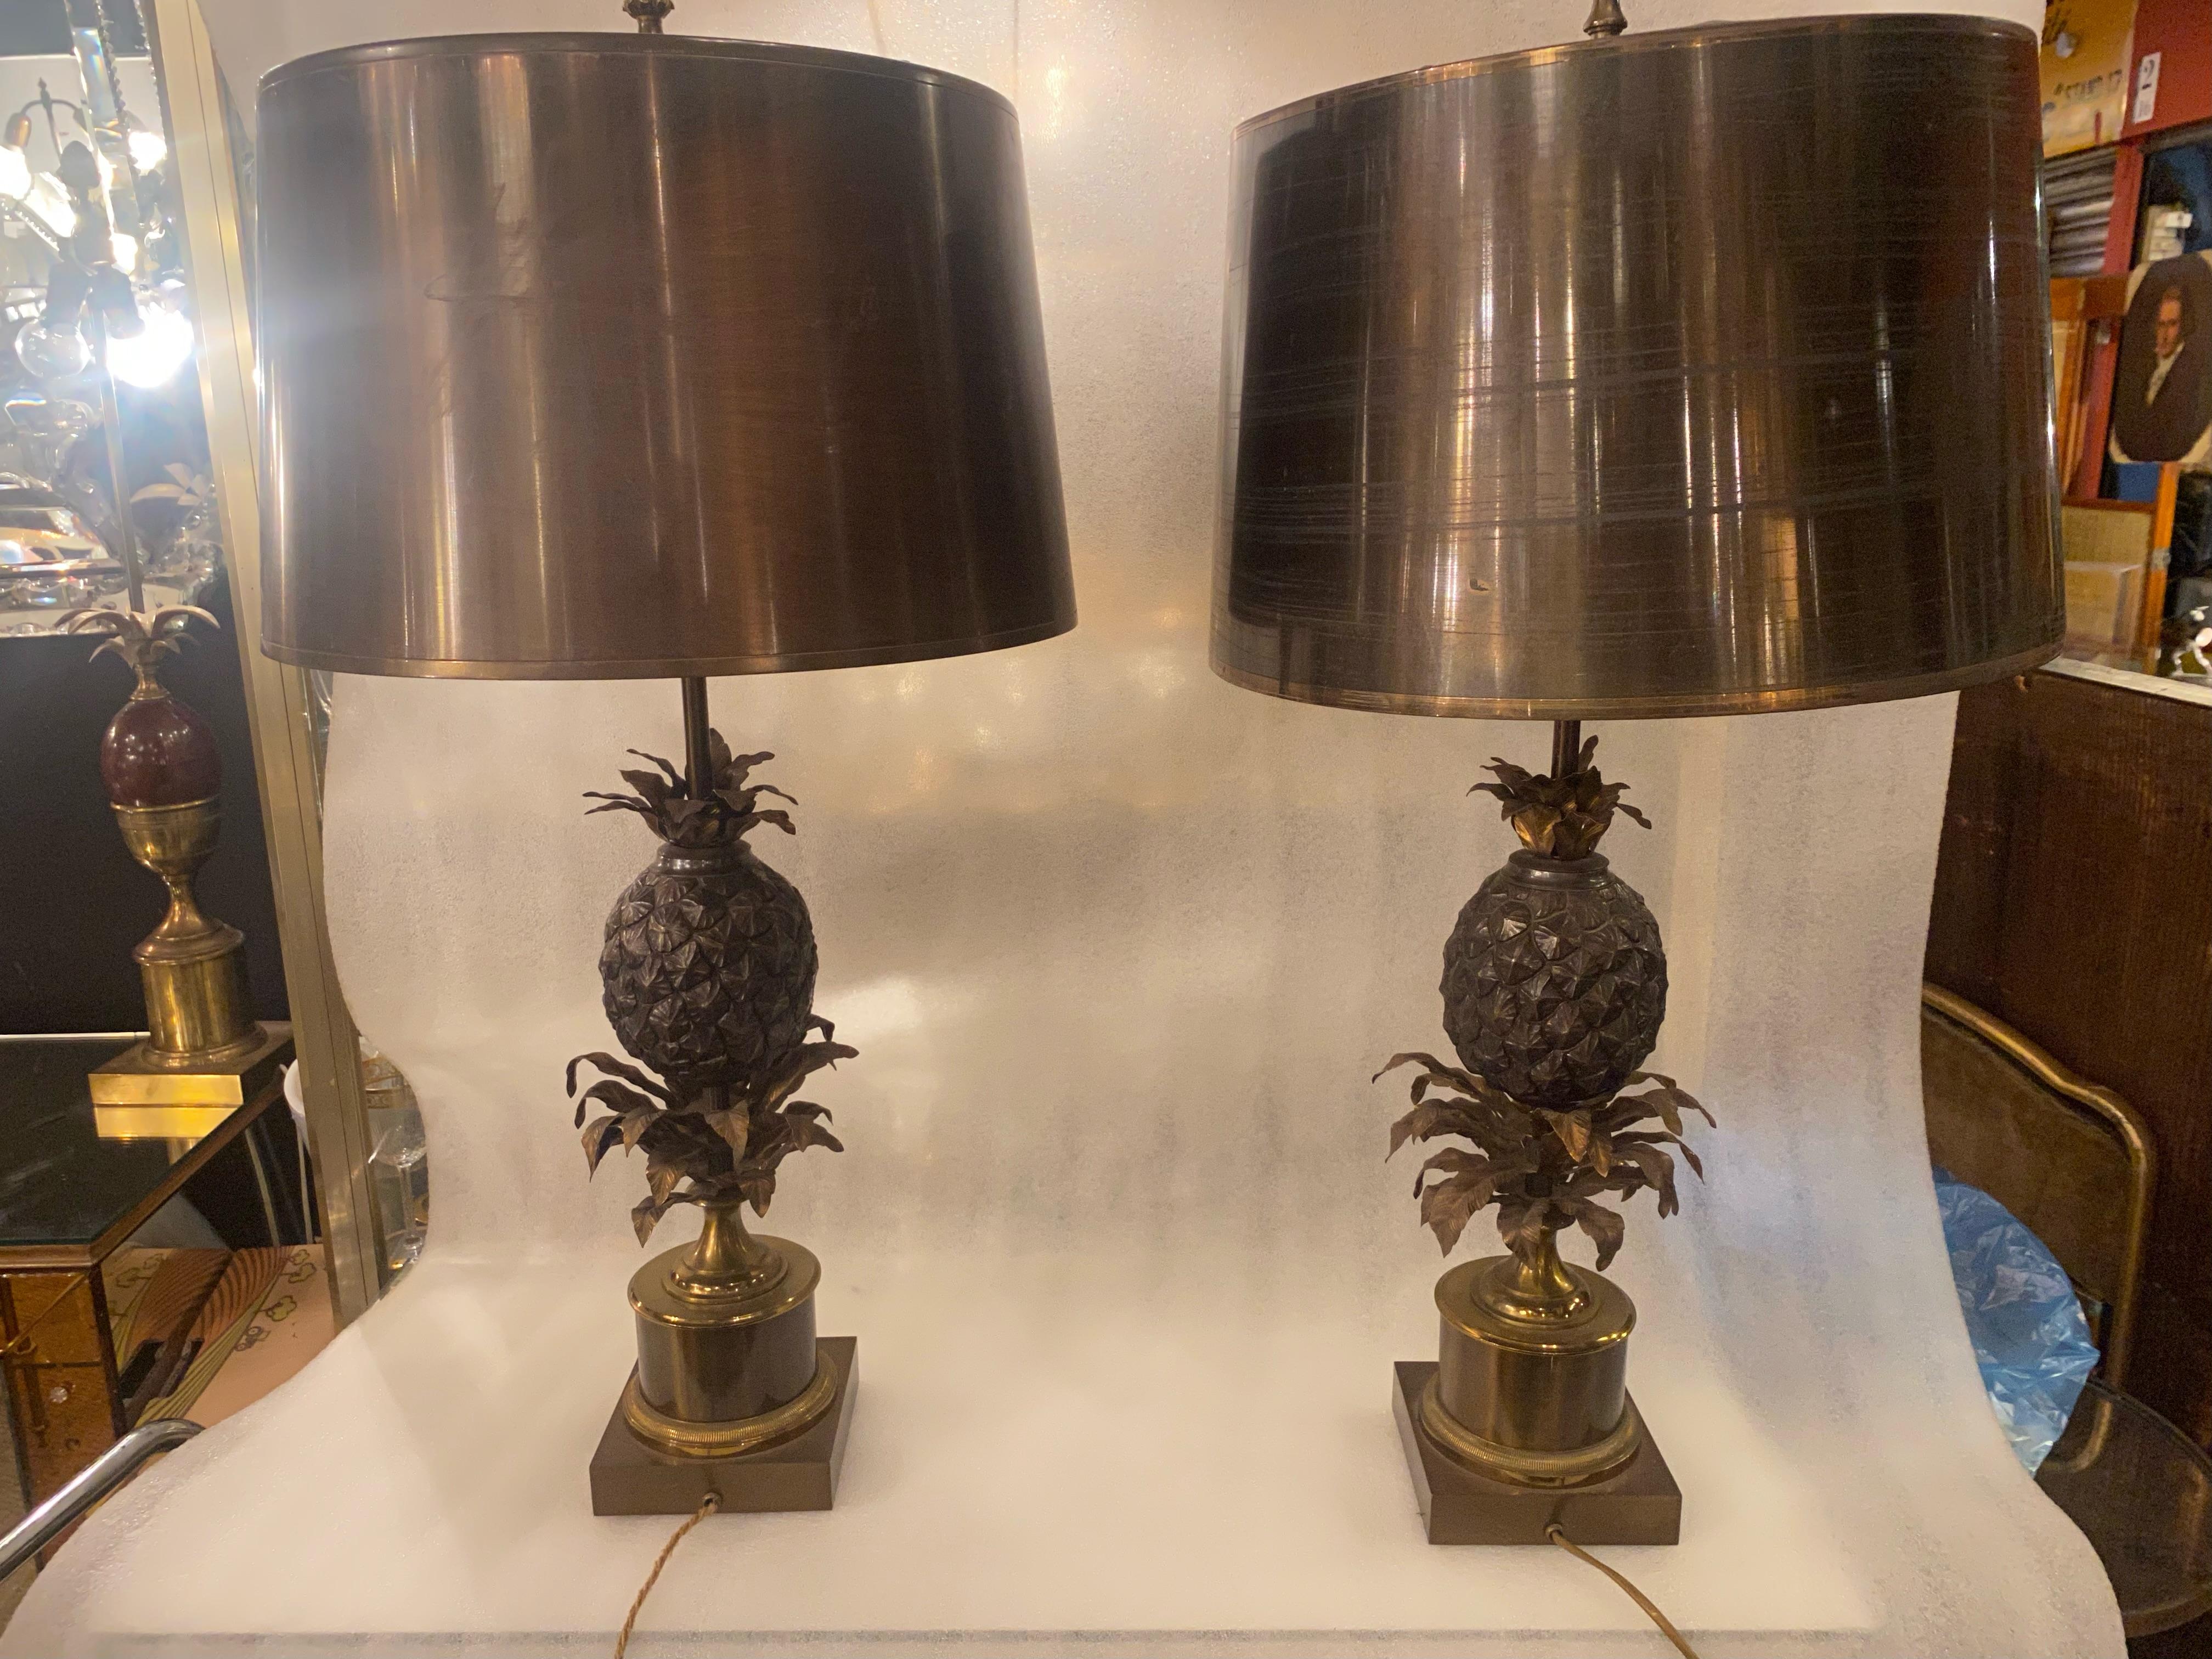 Pair of Pineapple lamps or similar signed Charles & Fils, made in France, bronze structure, lampshades in gilded brass and polished on the edges, good condition, Circa 1950/70
3 bulbs, bayonet and screw sockets
Height: 80cm
Base: 13 x 13